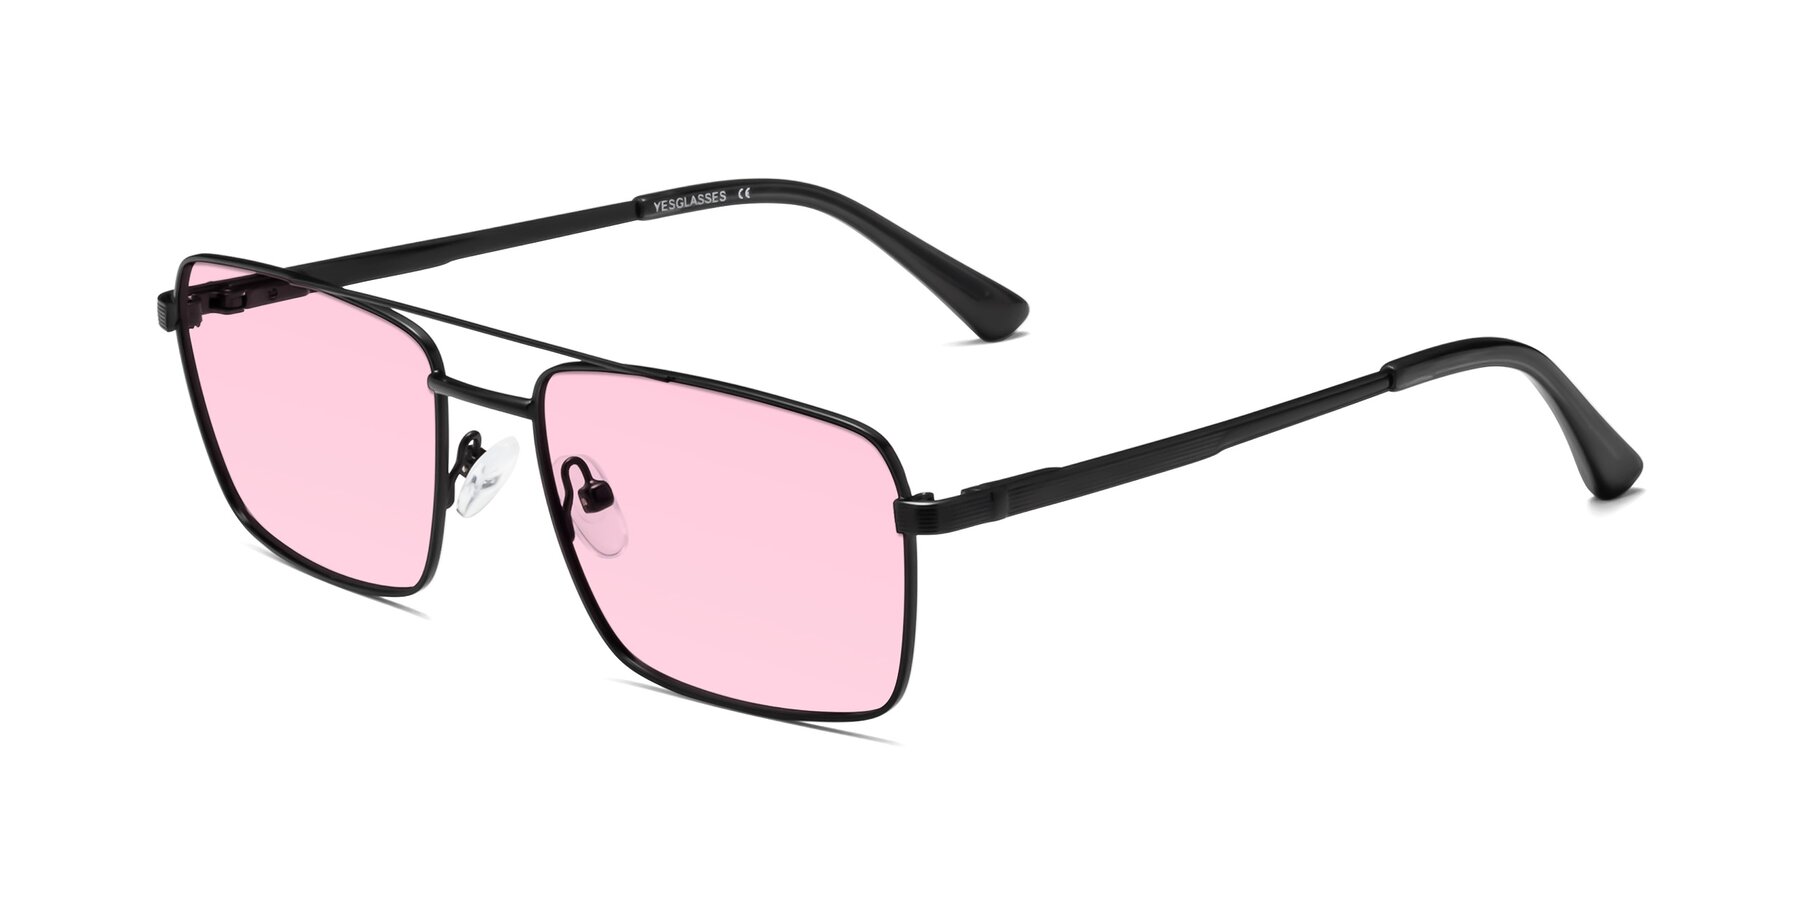 Angle of Beckum in Black with Light Pink Tinted Lenses